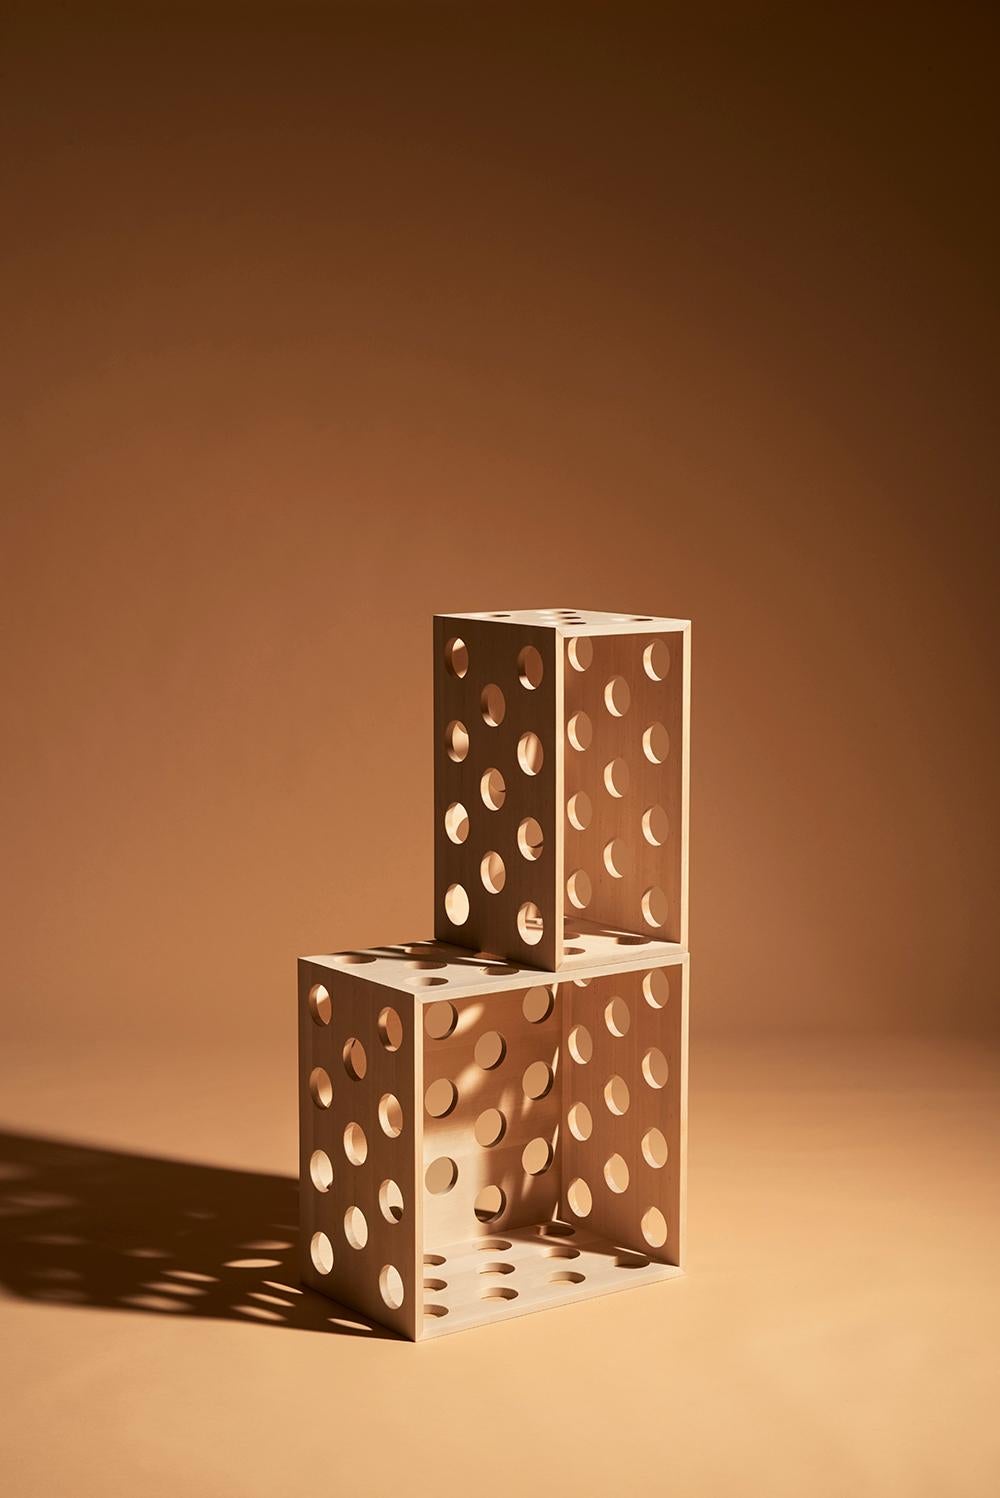 Swedish Perforated Medium Storage Box, Solid Birch Wood Perforated Box by Erik Olovsson For Sale